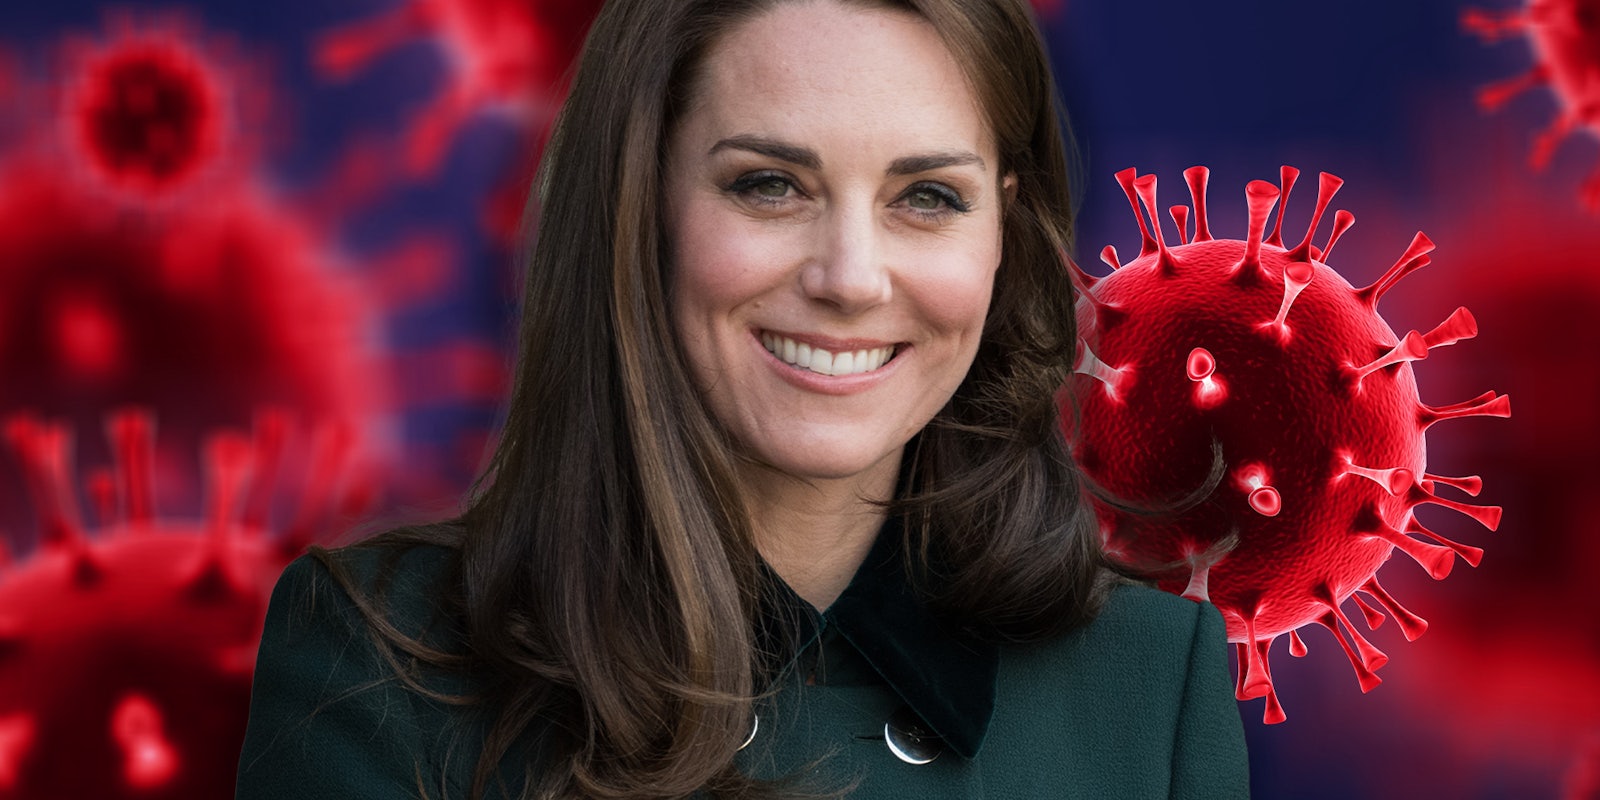 Kate Middleton's prolonged absence fuels Covid vaccine conspiracies